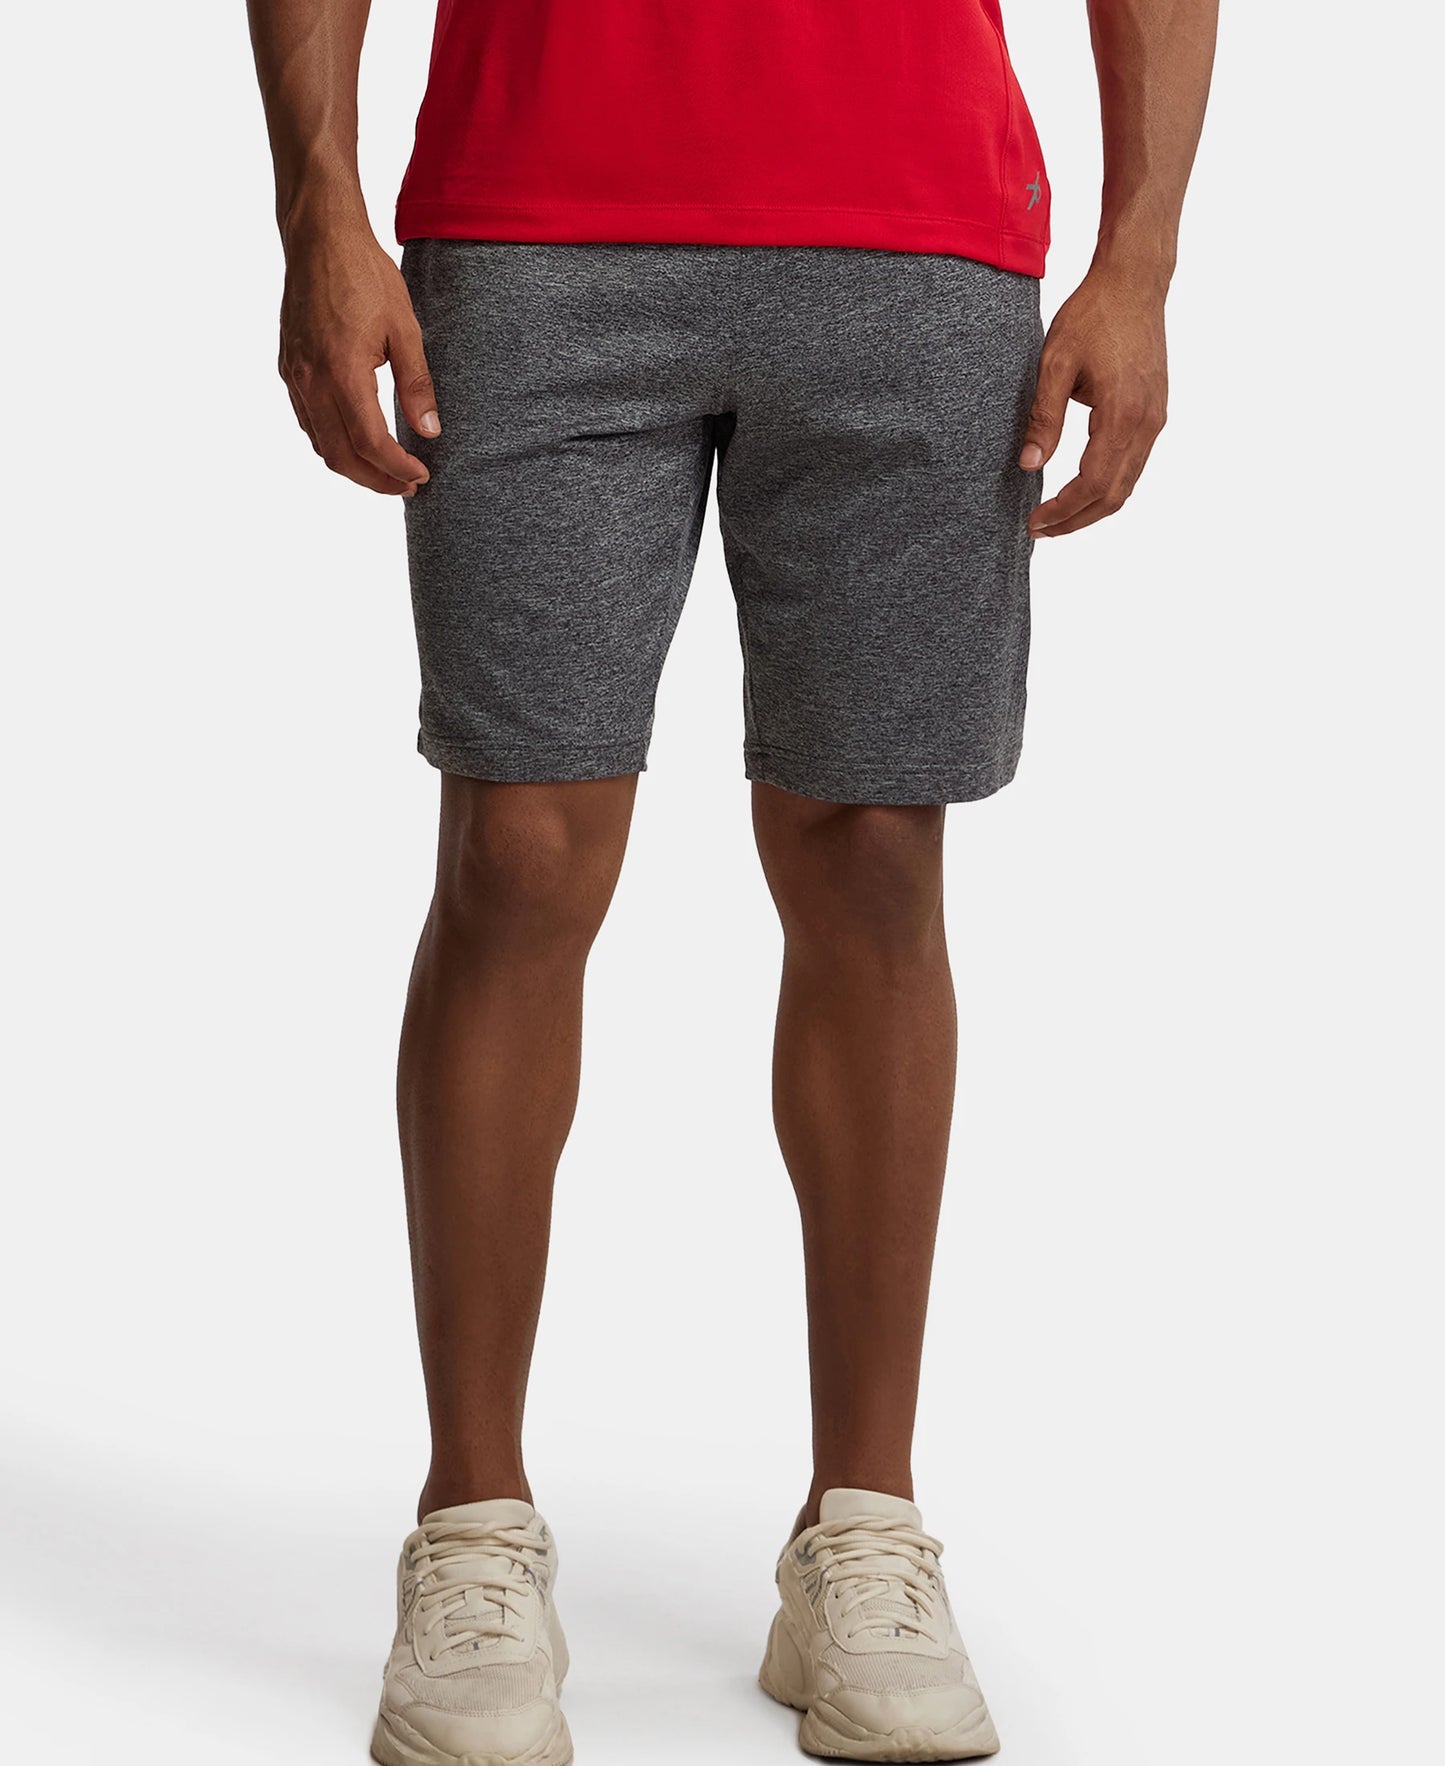 Soft Touch Microfiber Elastane Stretch Shorts with Back Zipper Pocket and StayFresh Treatment - Grey Marl-5